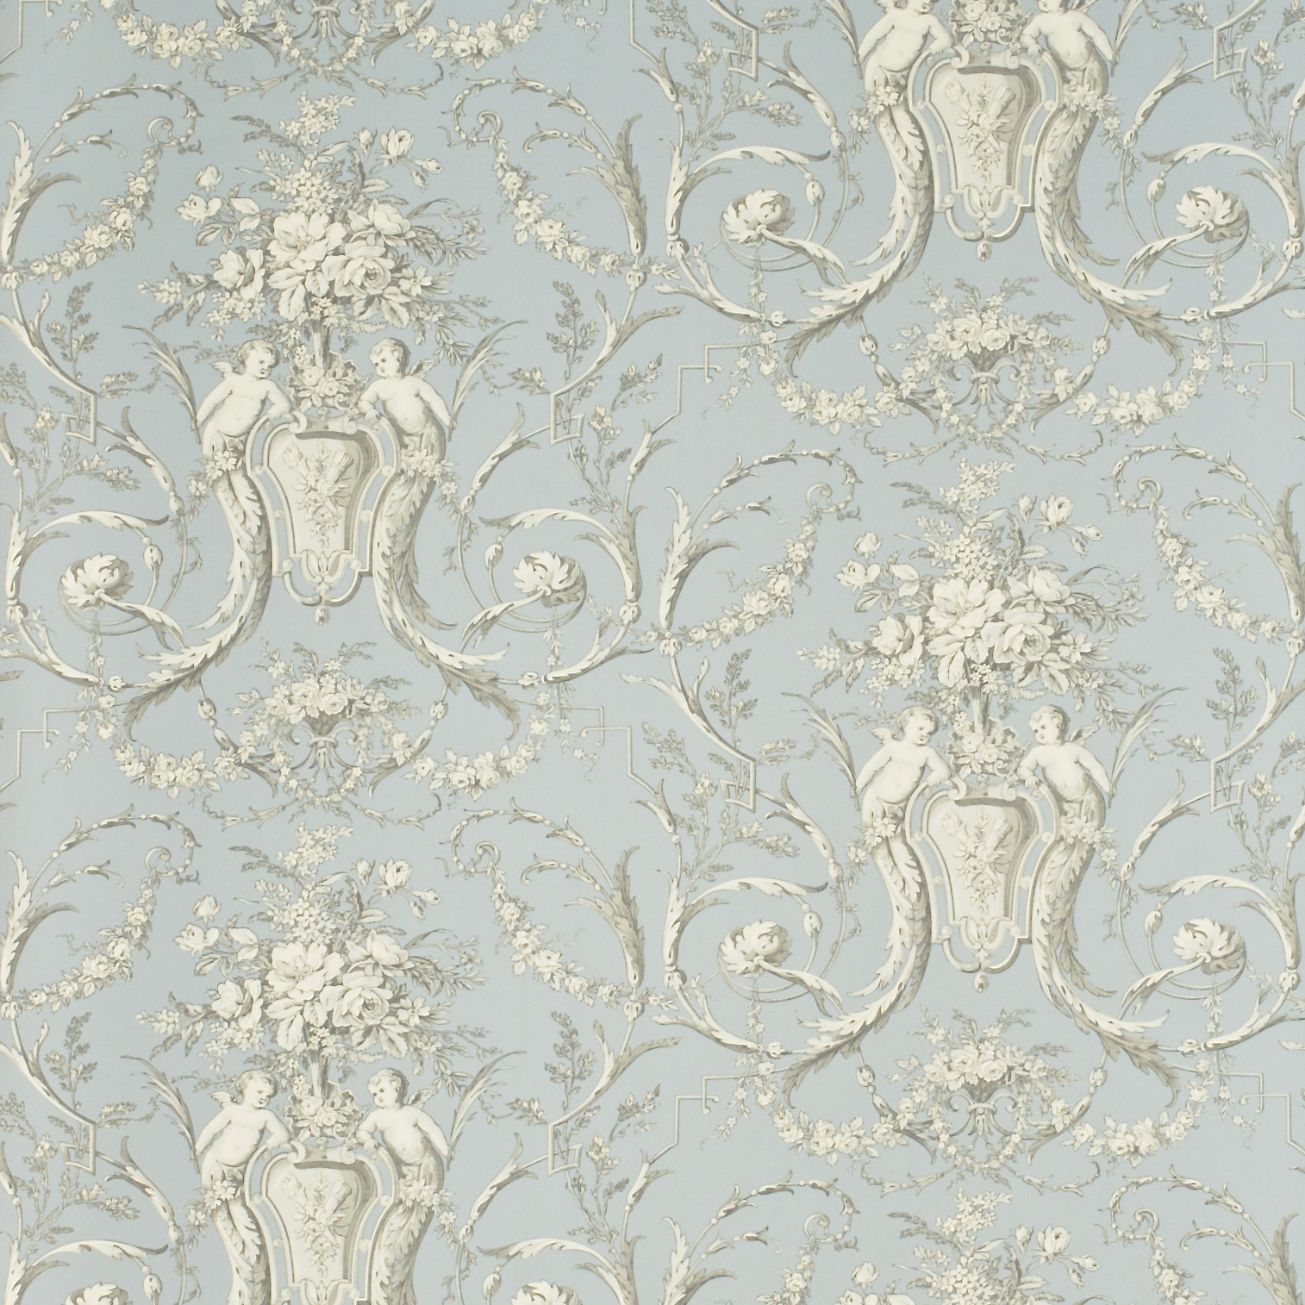 Gallery French Wallpaper Designs